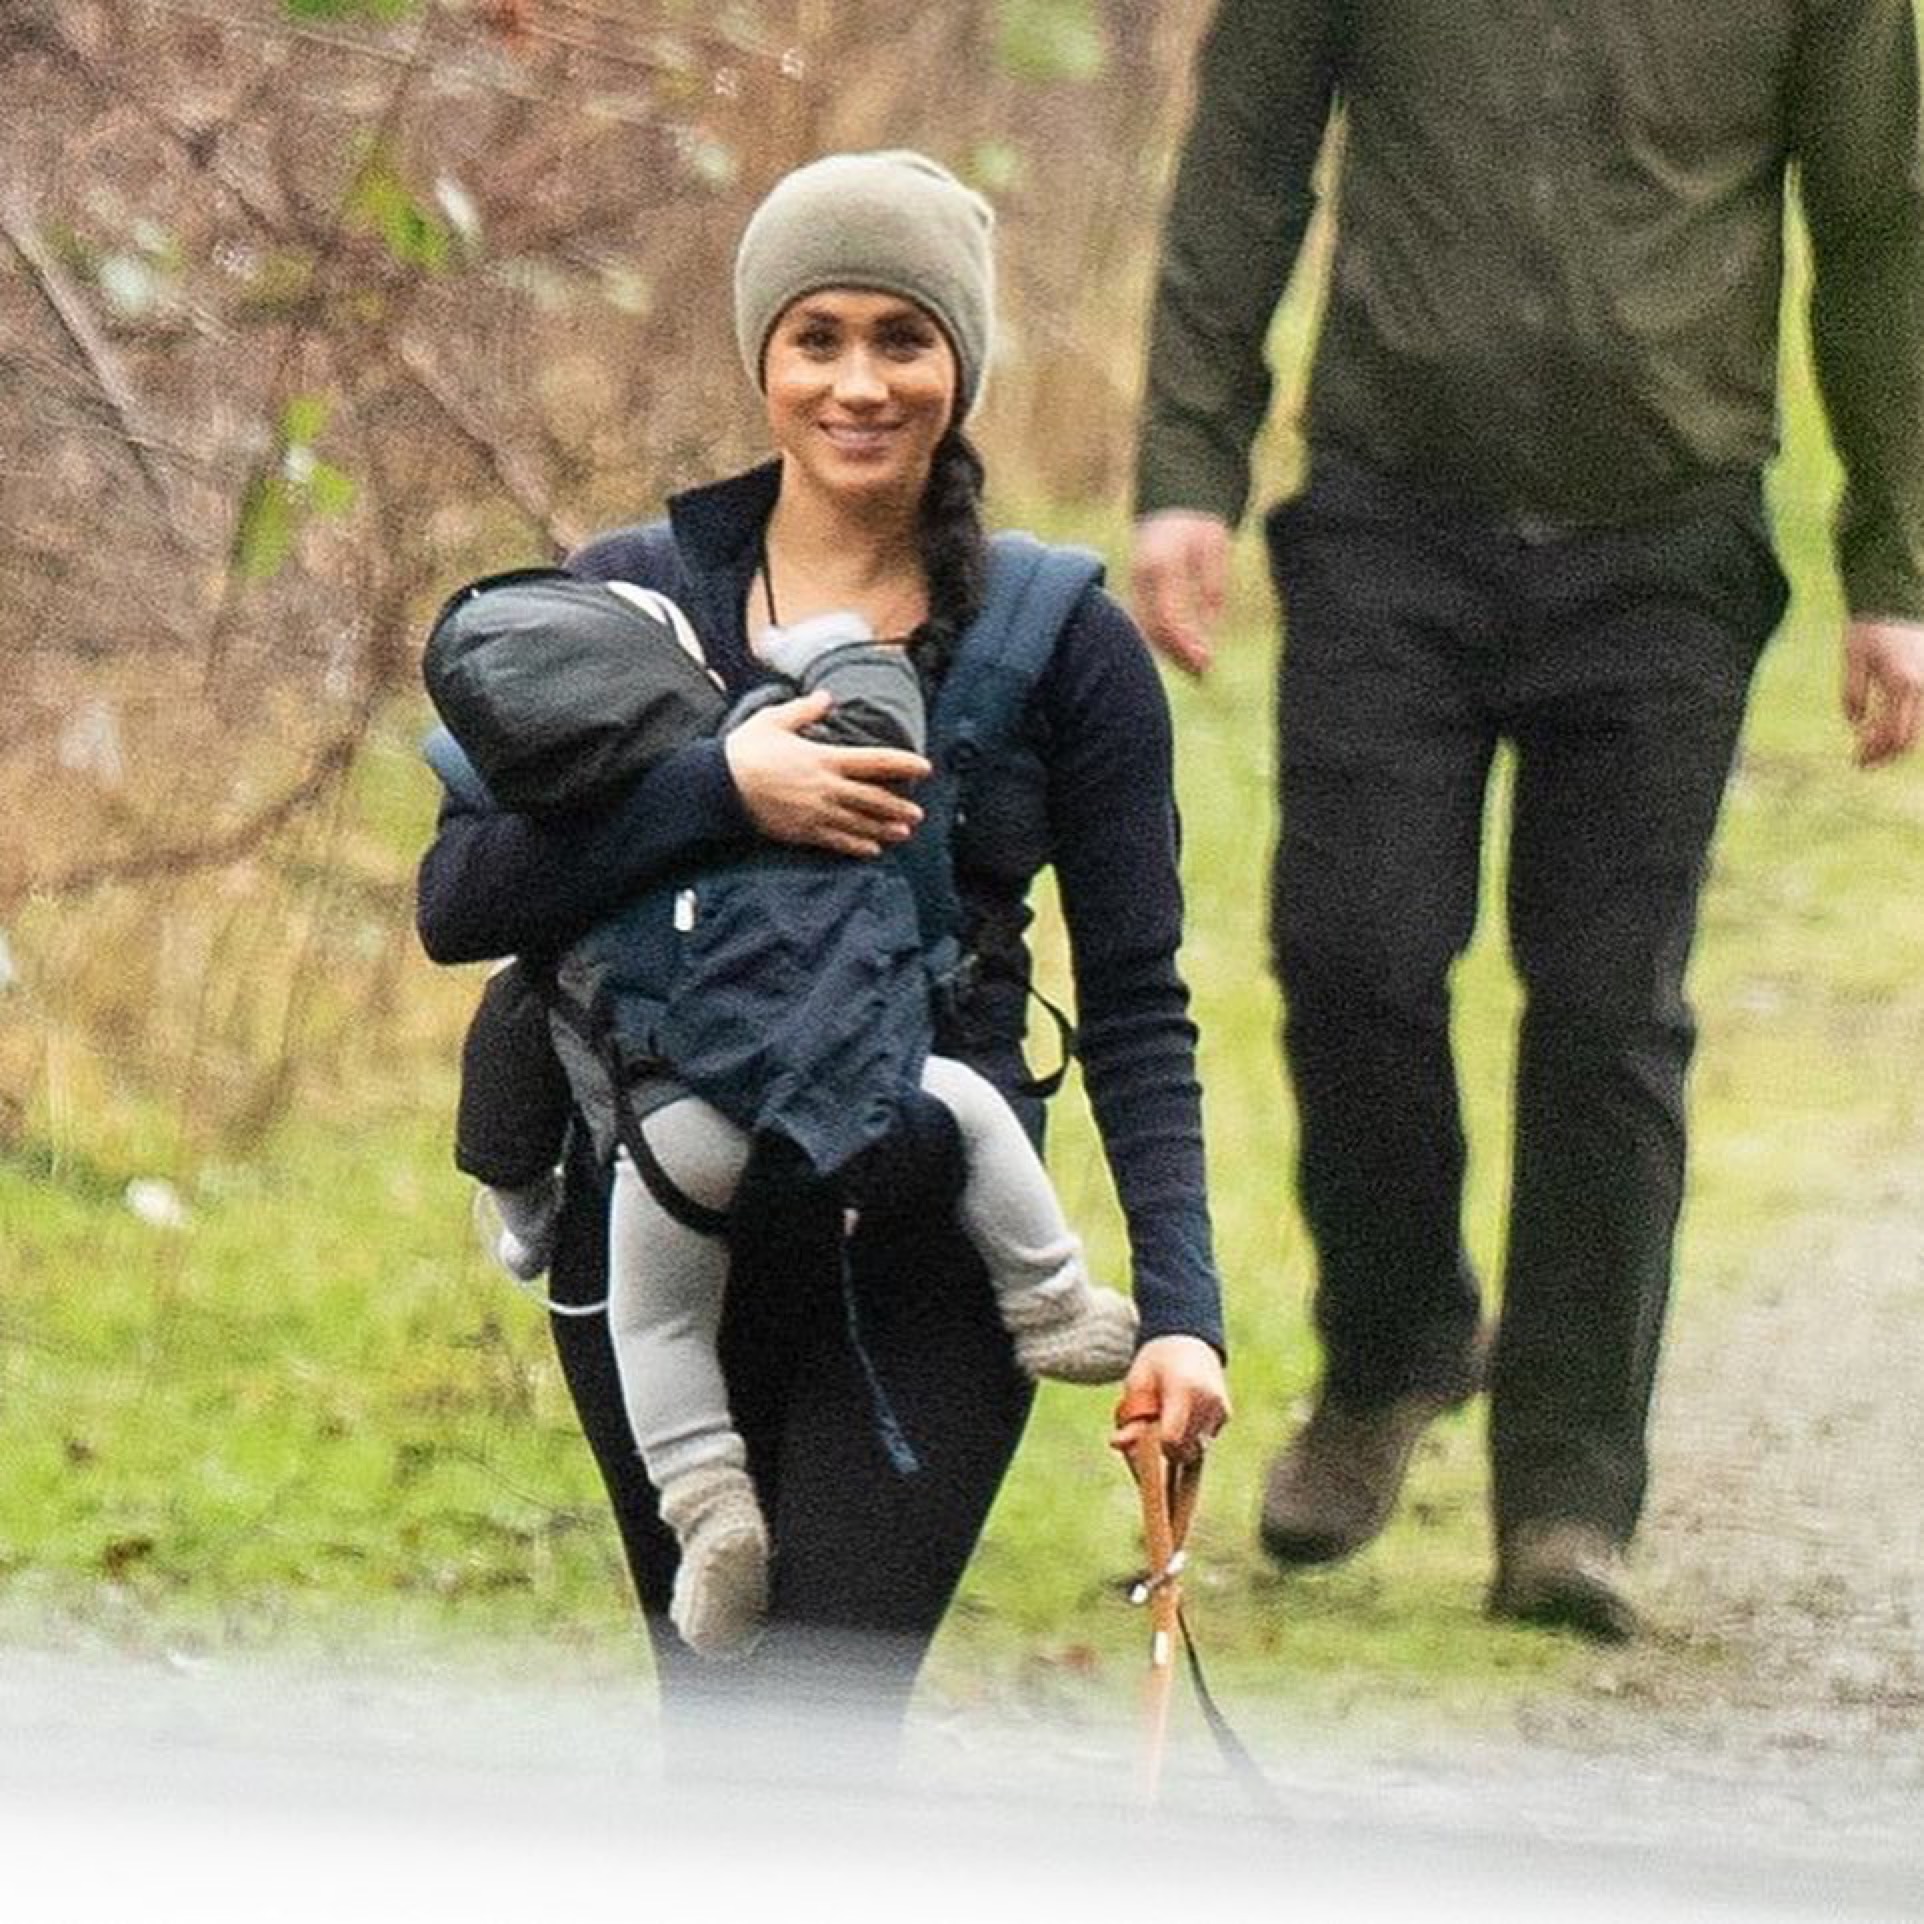 Meghan Markle was spotted in Horth Hill Regional Park with A